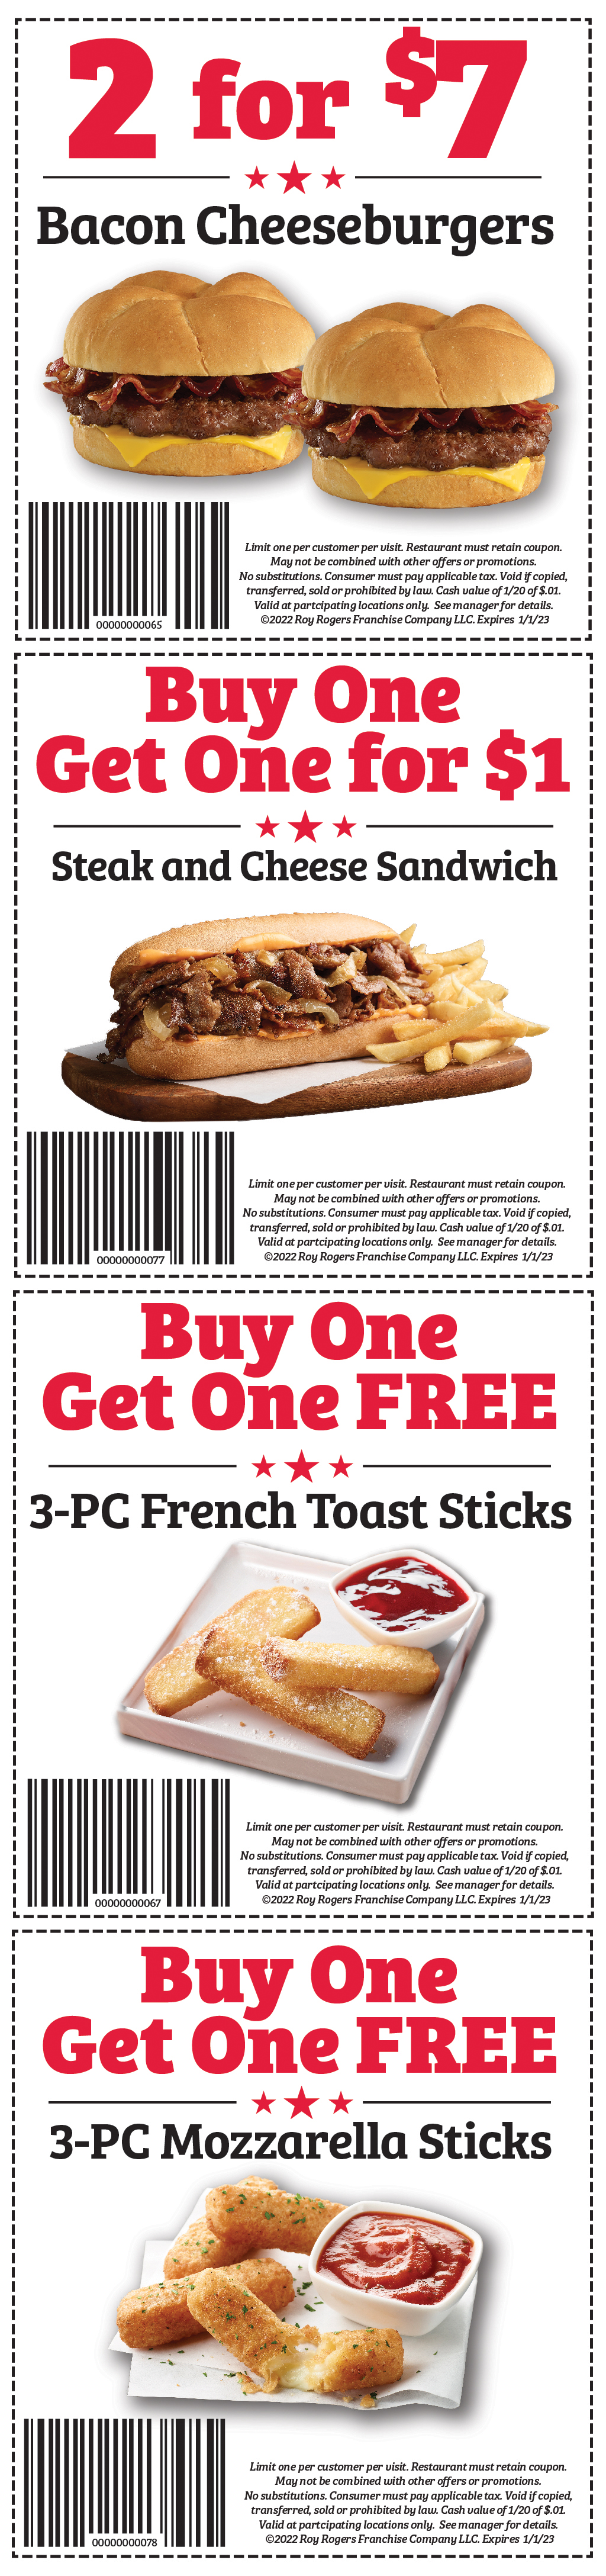 Great offers from Roy Rogers Restaurants